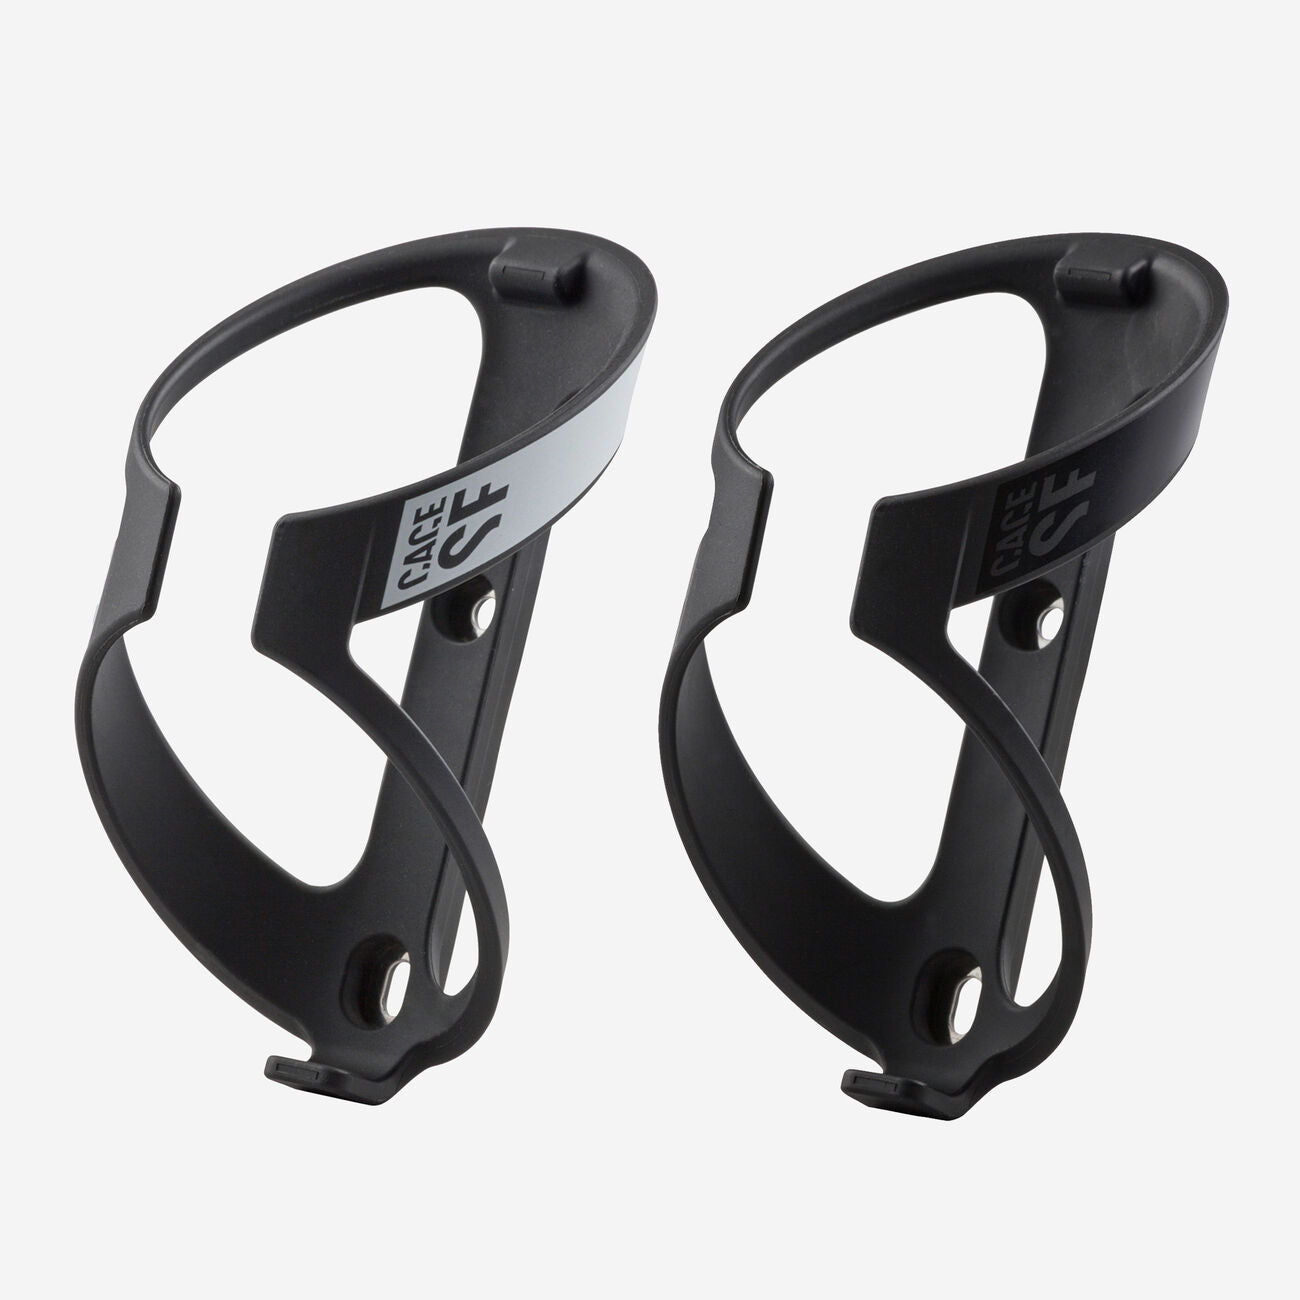 CANYON SF Bottle Cage